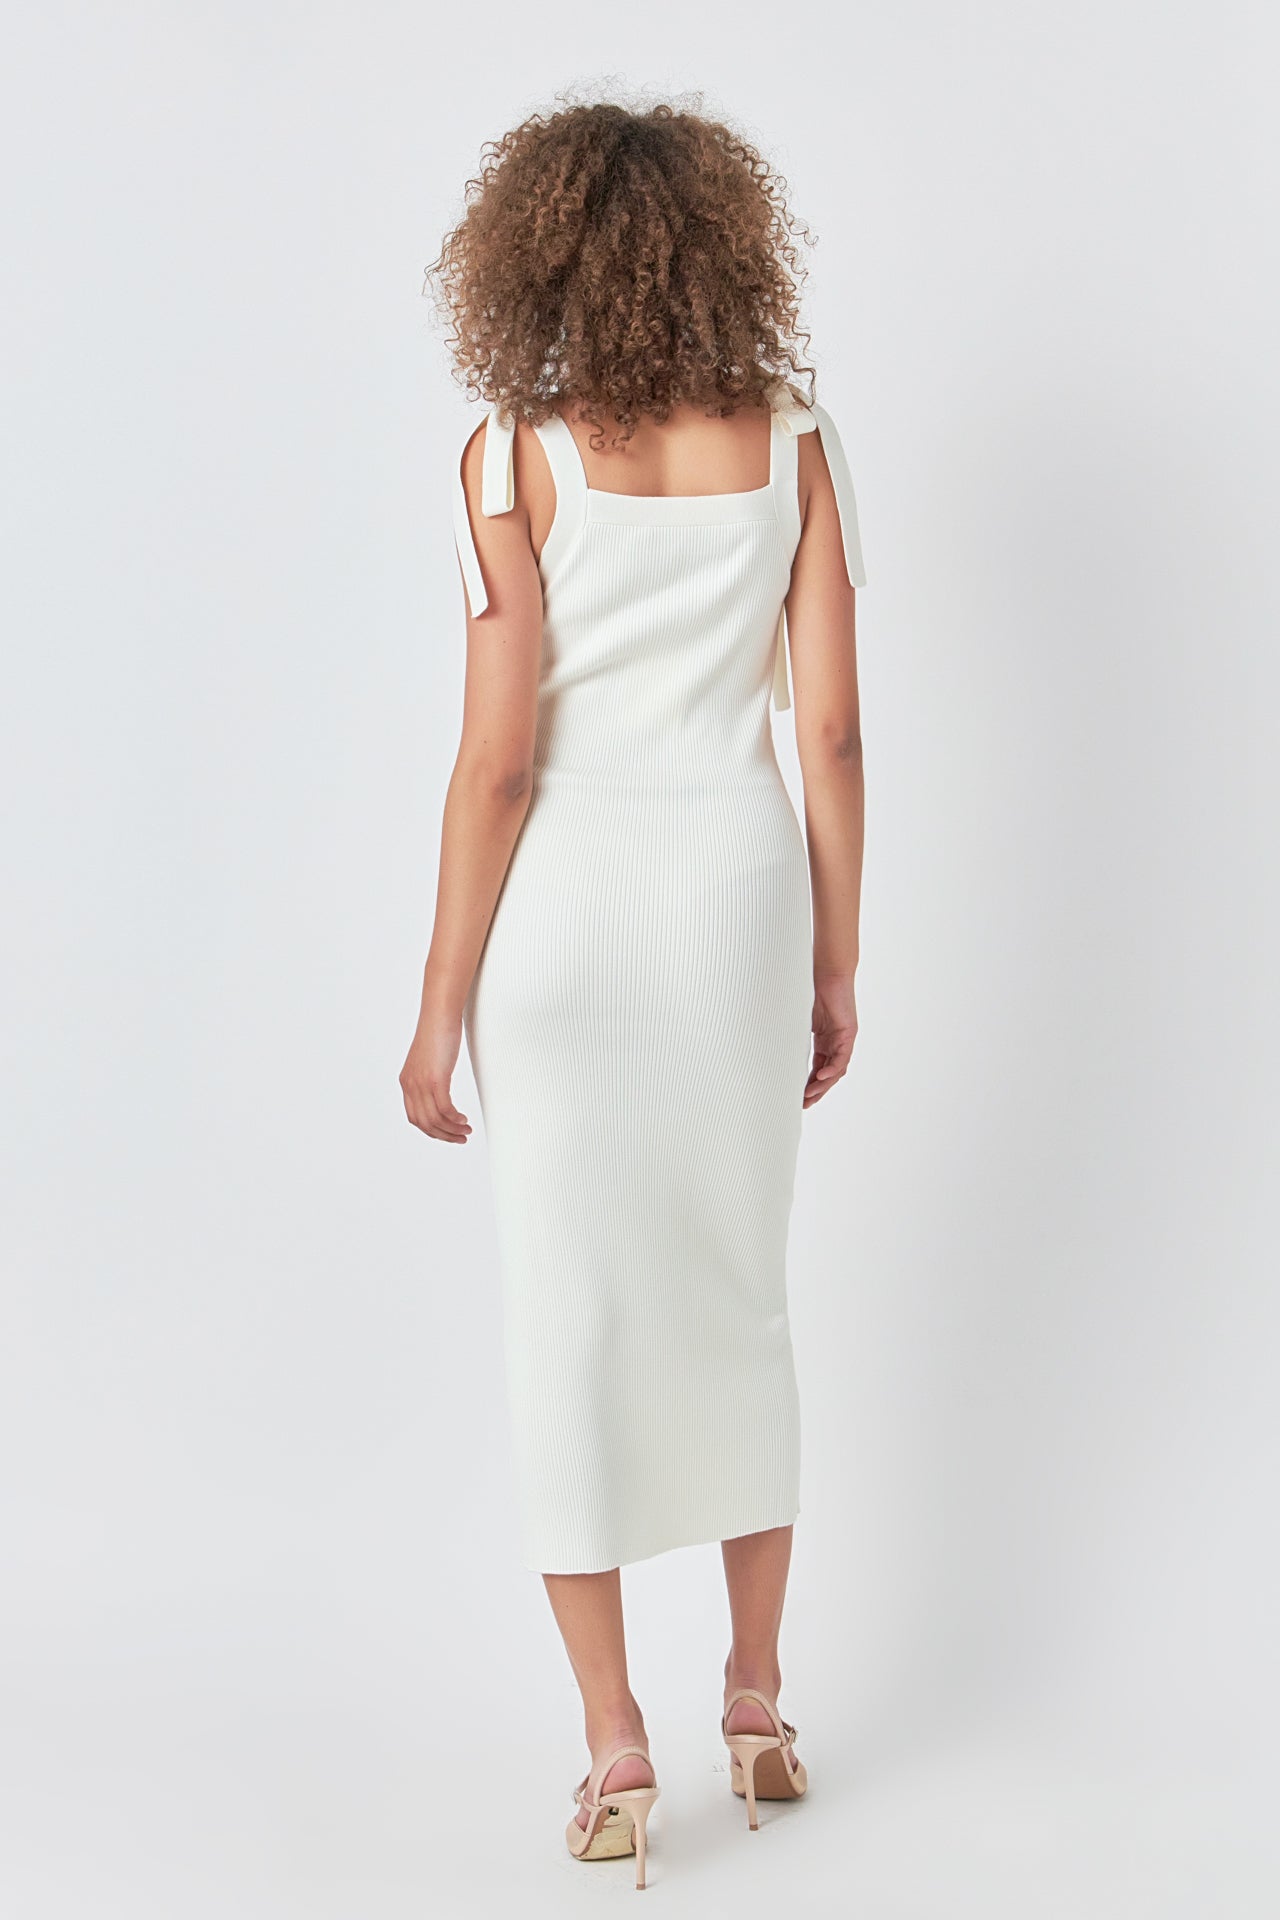 ENDLESS ROSE - Solid Knit Midi Dress - DRESSES available at Objectrare